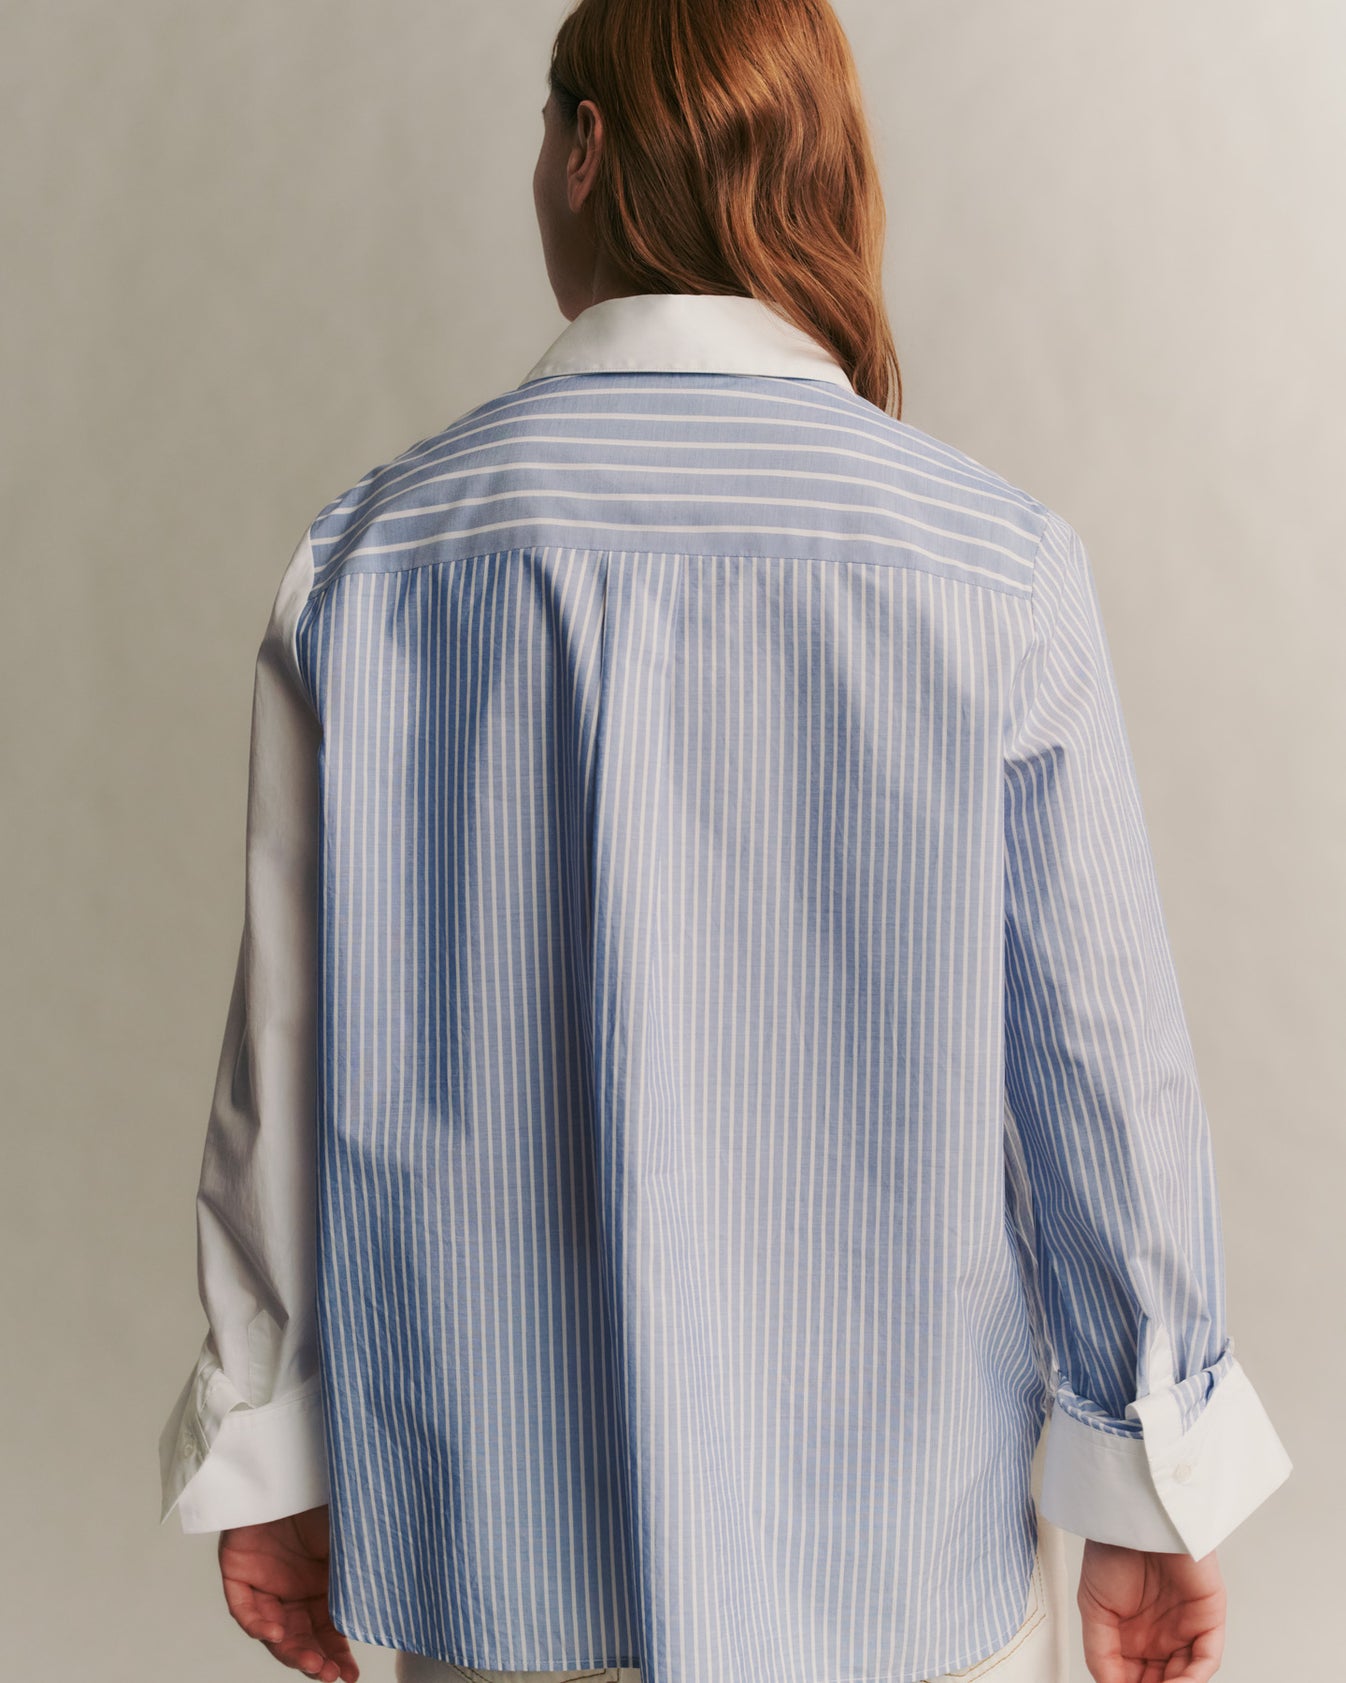 TWP Indigo/white New Morning After shirt in combo stripe view 3